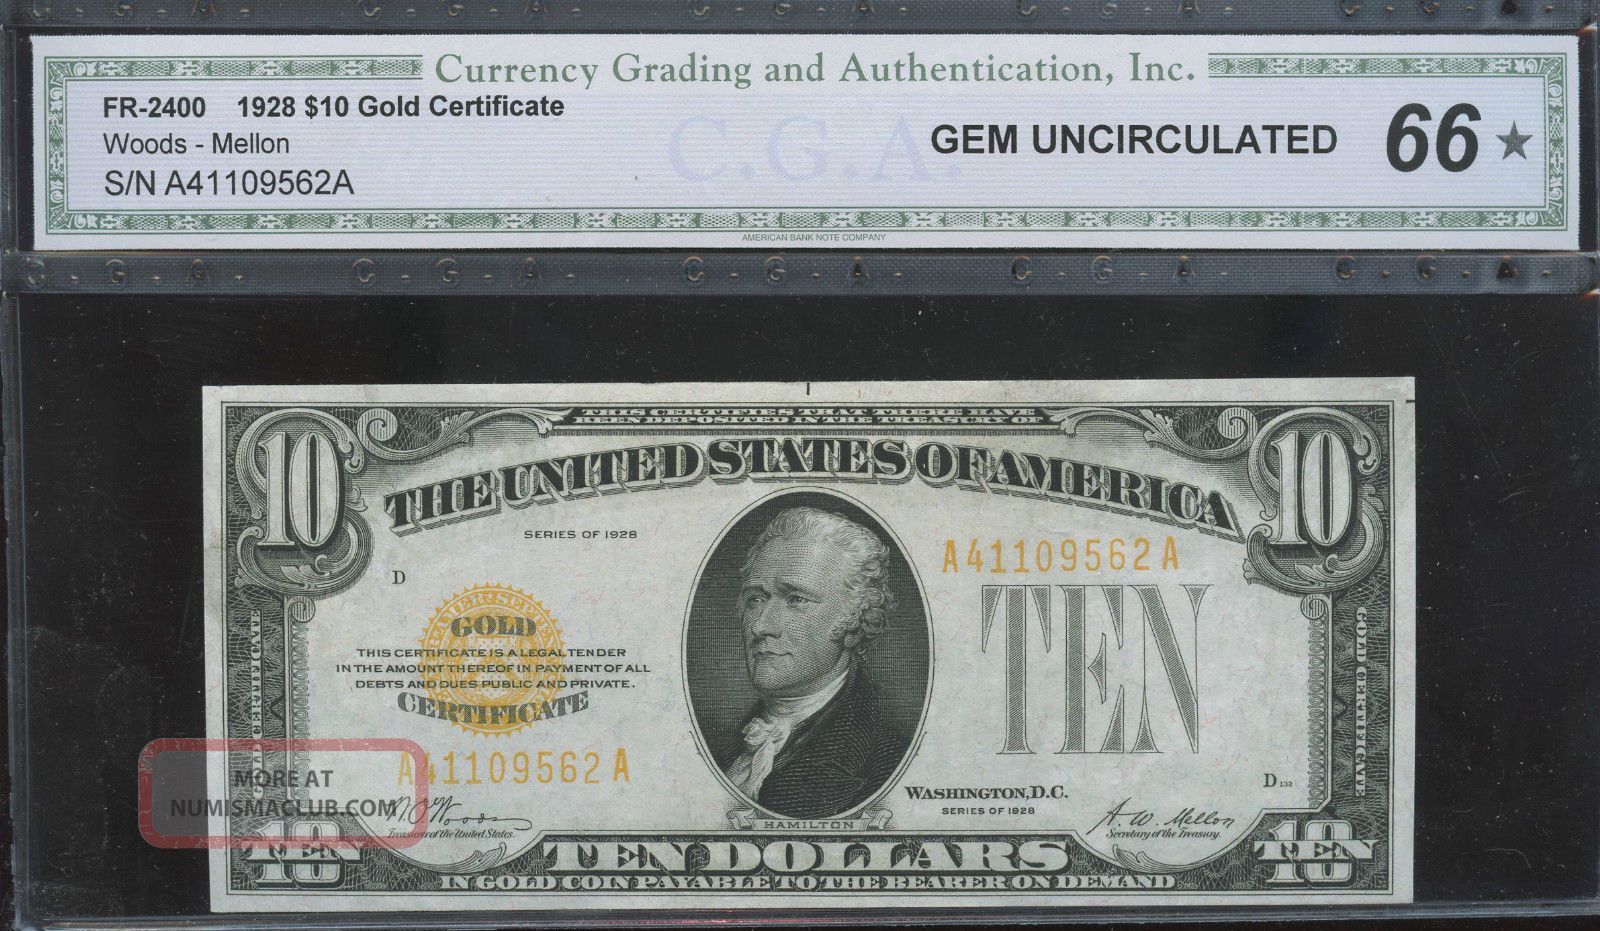 $10 1928 Gold Certificate Cga Gem 66 2 Of 2 Tremendous Small Size Notes photo